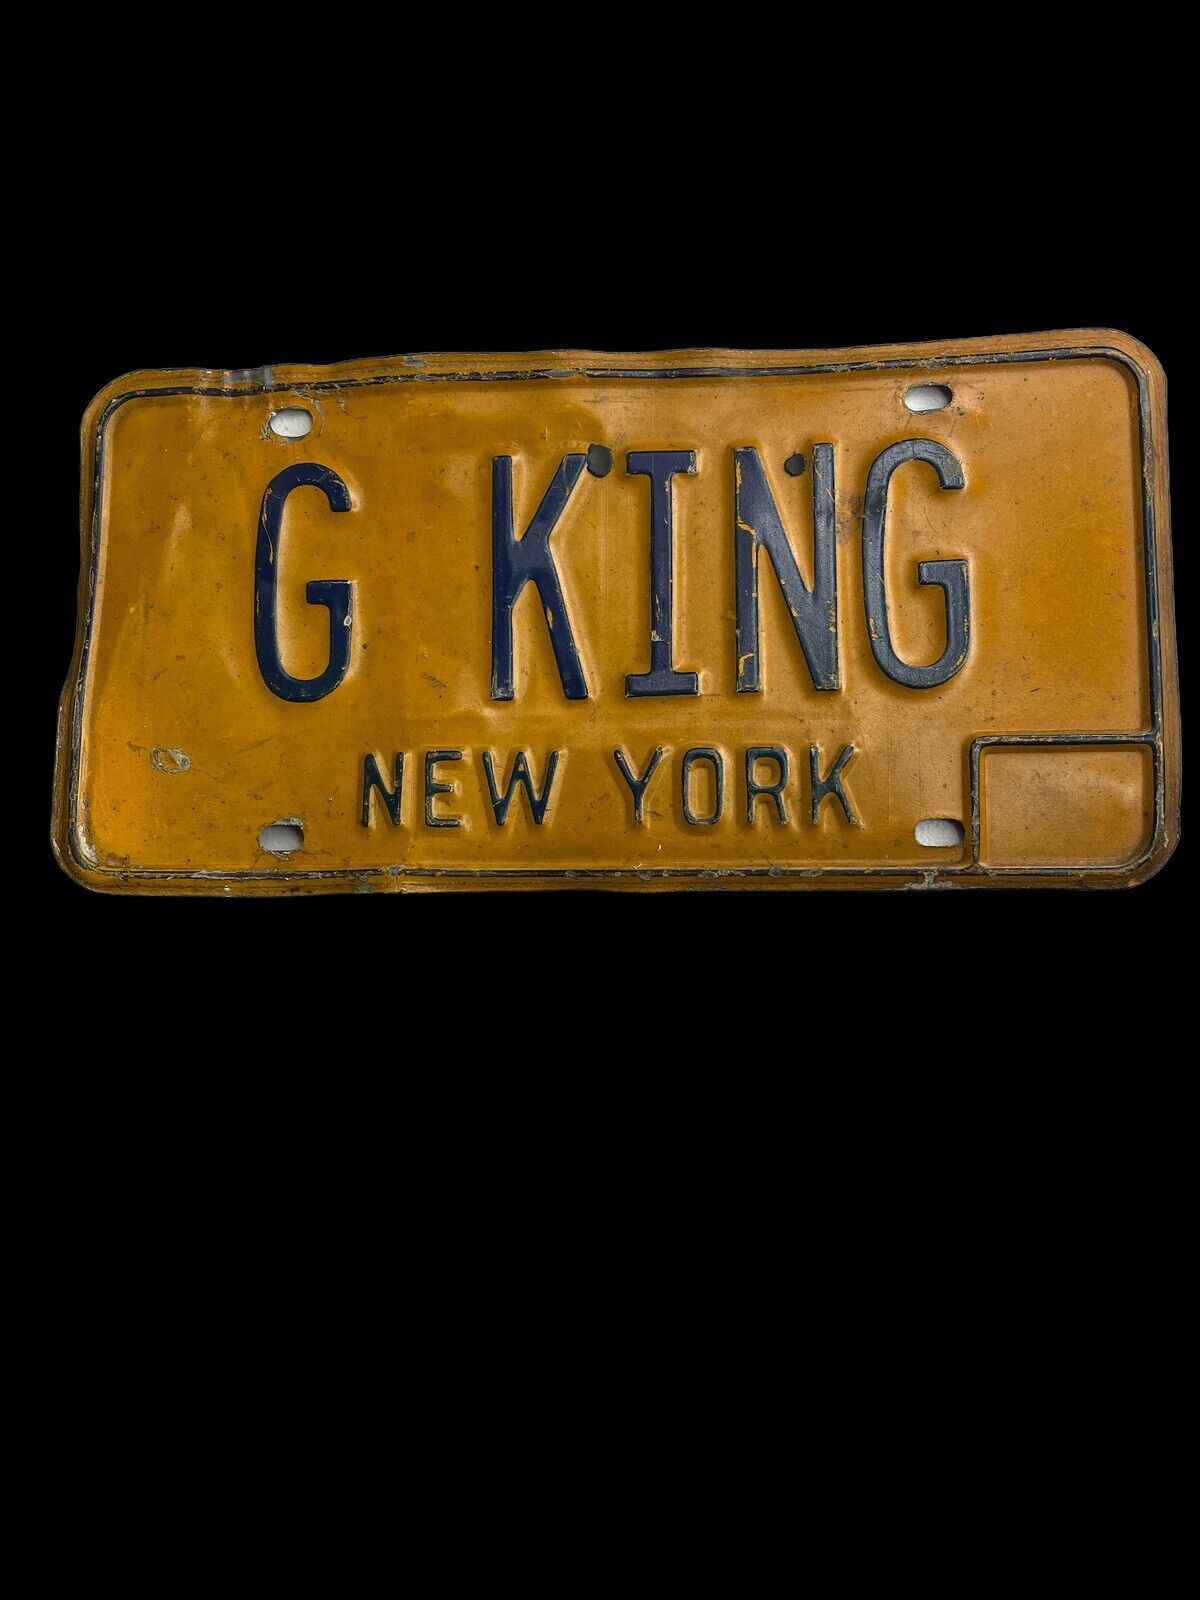 Vintage New York License Plate G-King Not Mint But Super Cool and Rare